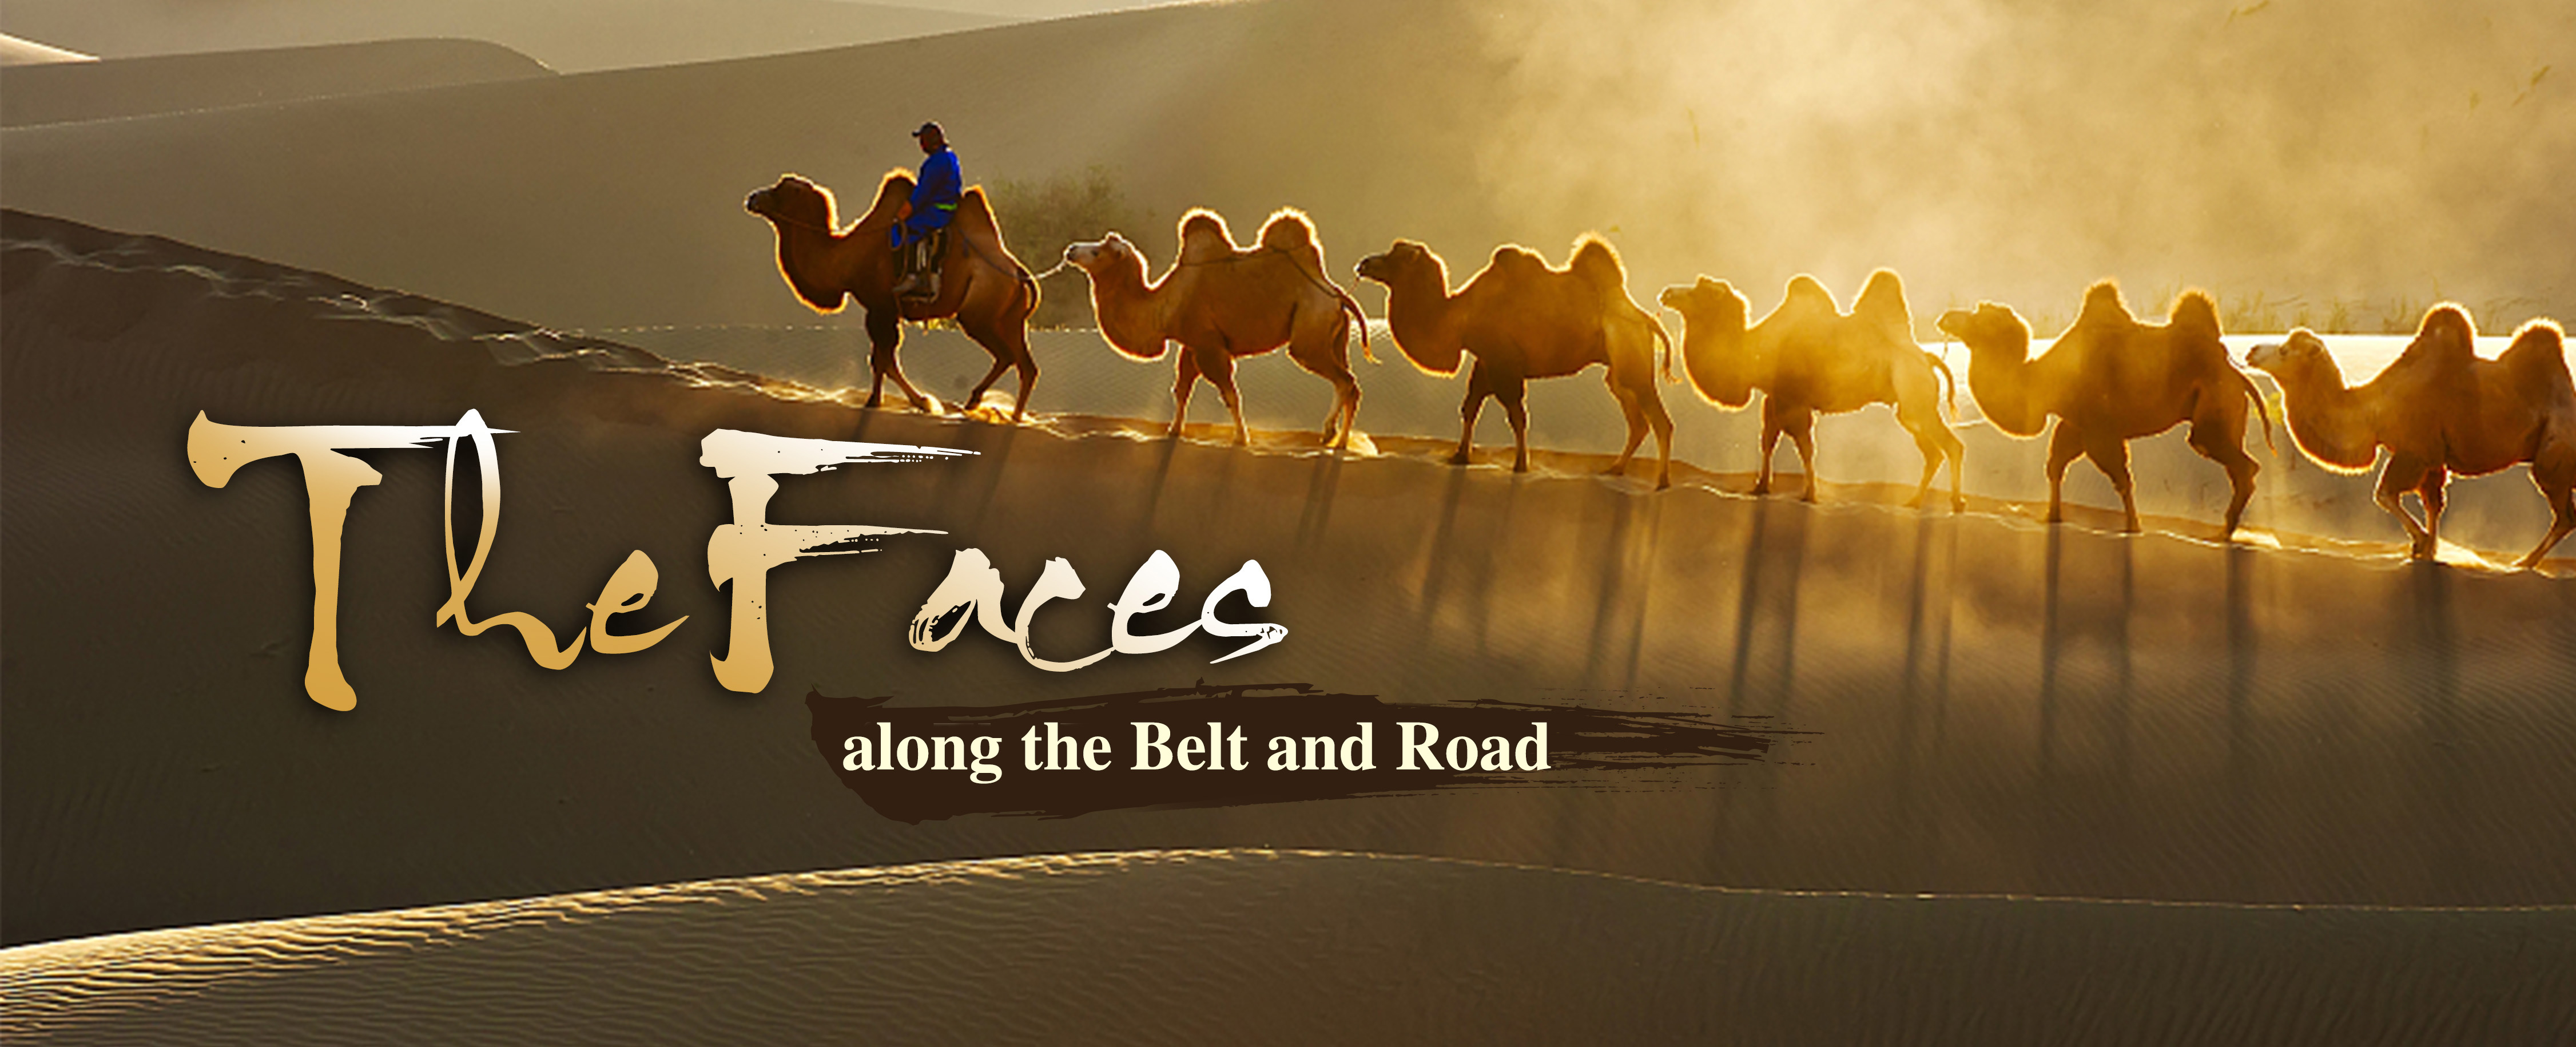 paike_The faces along the Belt and Road